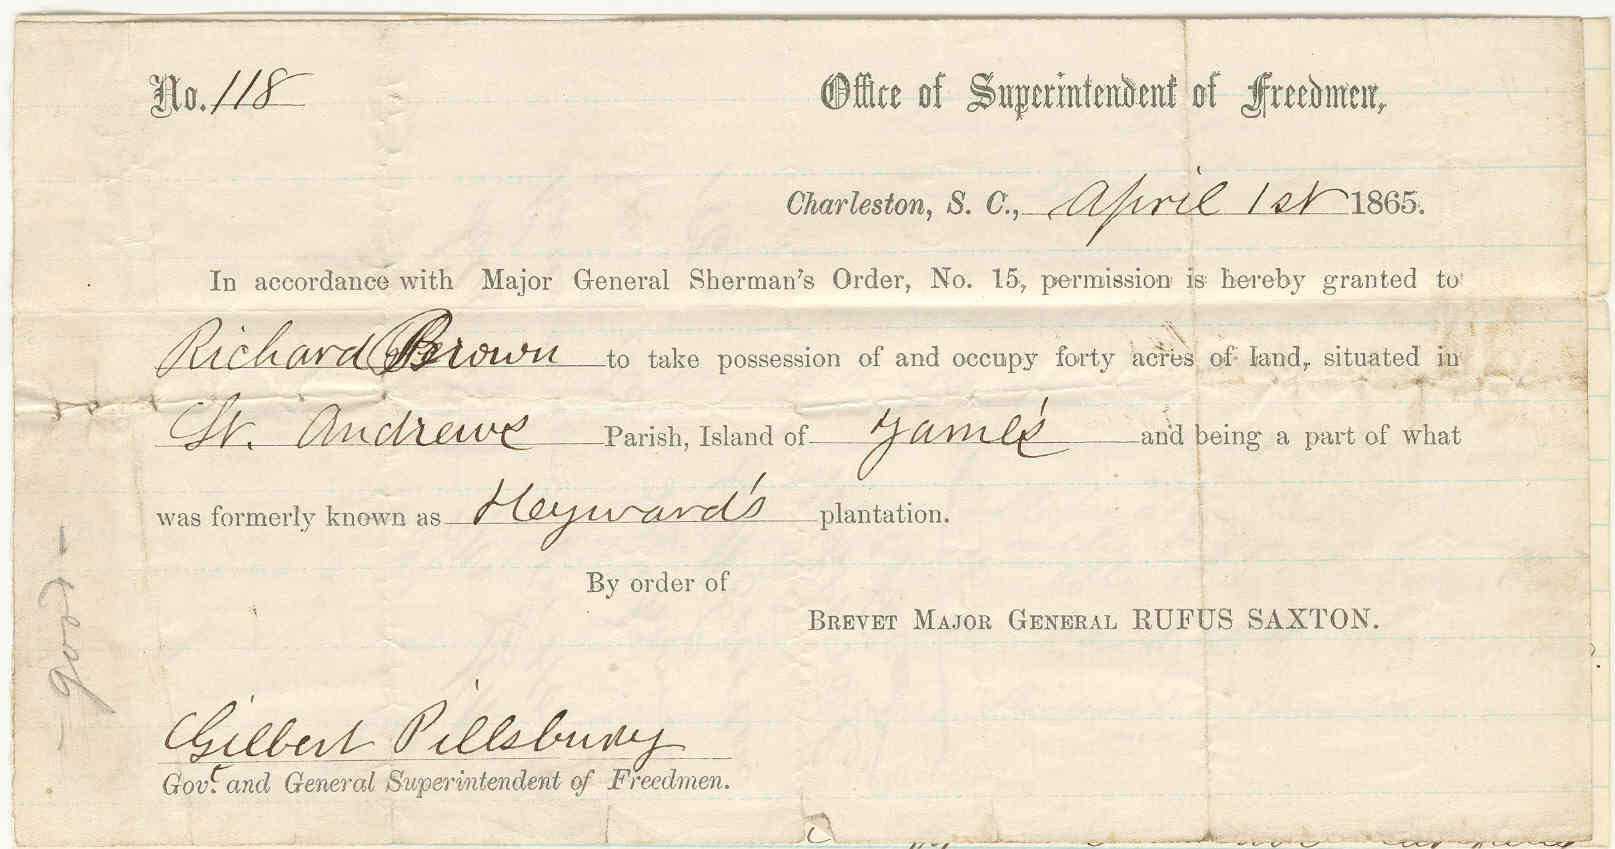 Printed document reading "No.418 Office of Superintendent of Freedmen, Charleston, S. C., April let 1865. In accordance with Major General Sherman's Order, No. 15, permission is hereby granted to Richard Brown "St. Andrewe was formerly known as. to take possession of and occupy forty acres of land, situated in Parish, Island of Jame Heyward's plantation. and being a part of what By order of BREVET MAJOR GENERAL RUFUS SAXTON. Gilbert Pillsbury. Goe, and General Superintendent of Freemen."